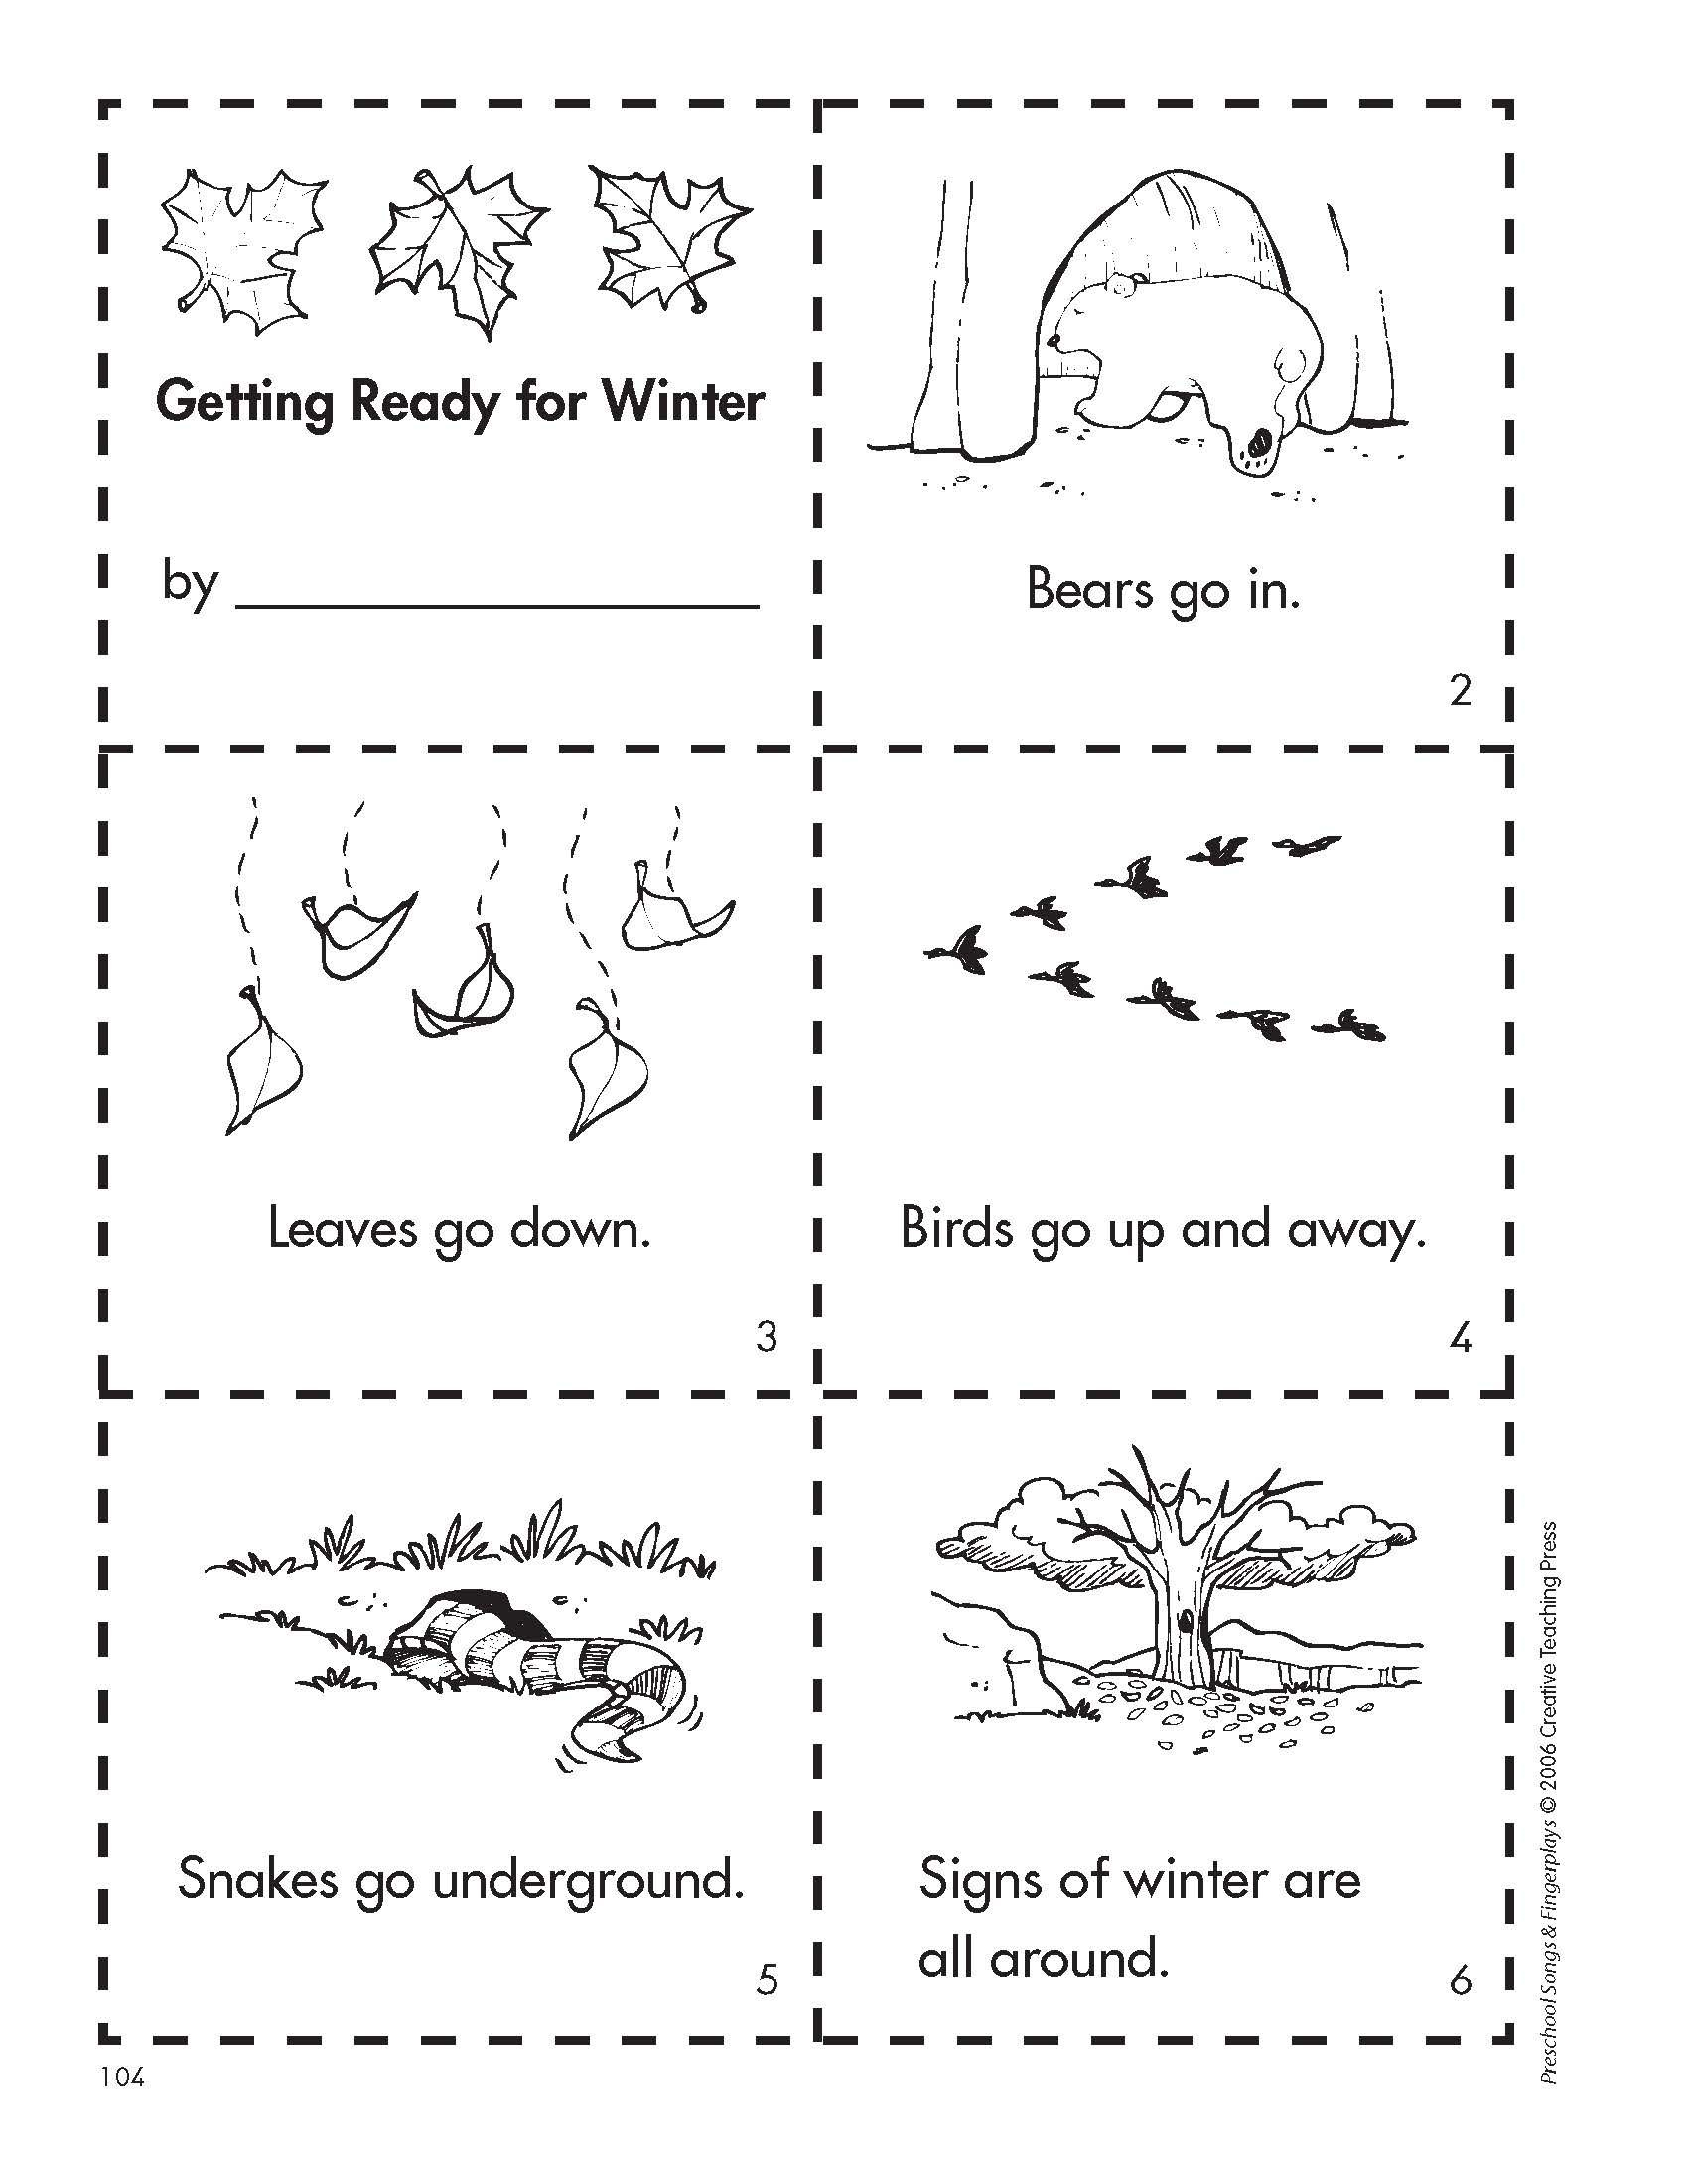 Get Ready For Winter With This Free Minibook Reproducible. | Fall - Free Printable Hibernation Worksheets